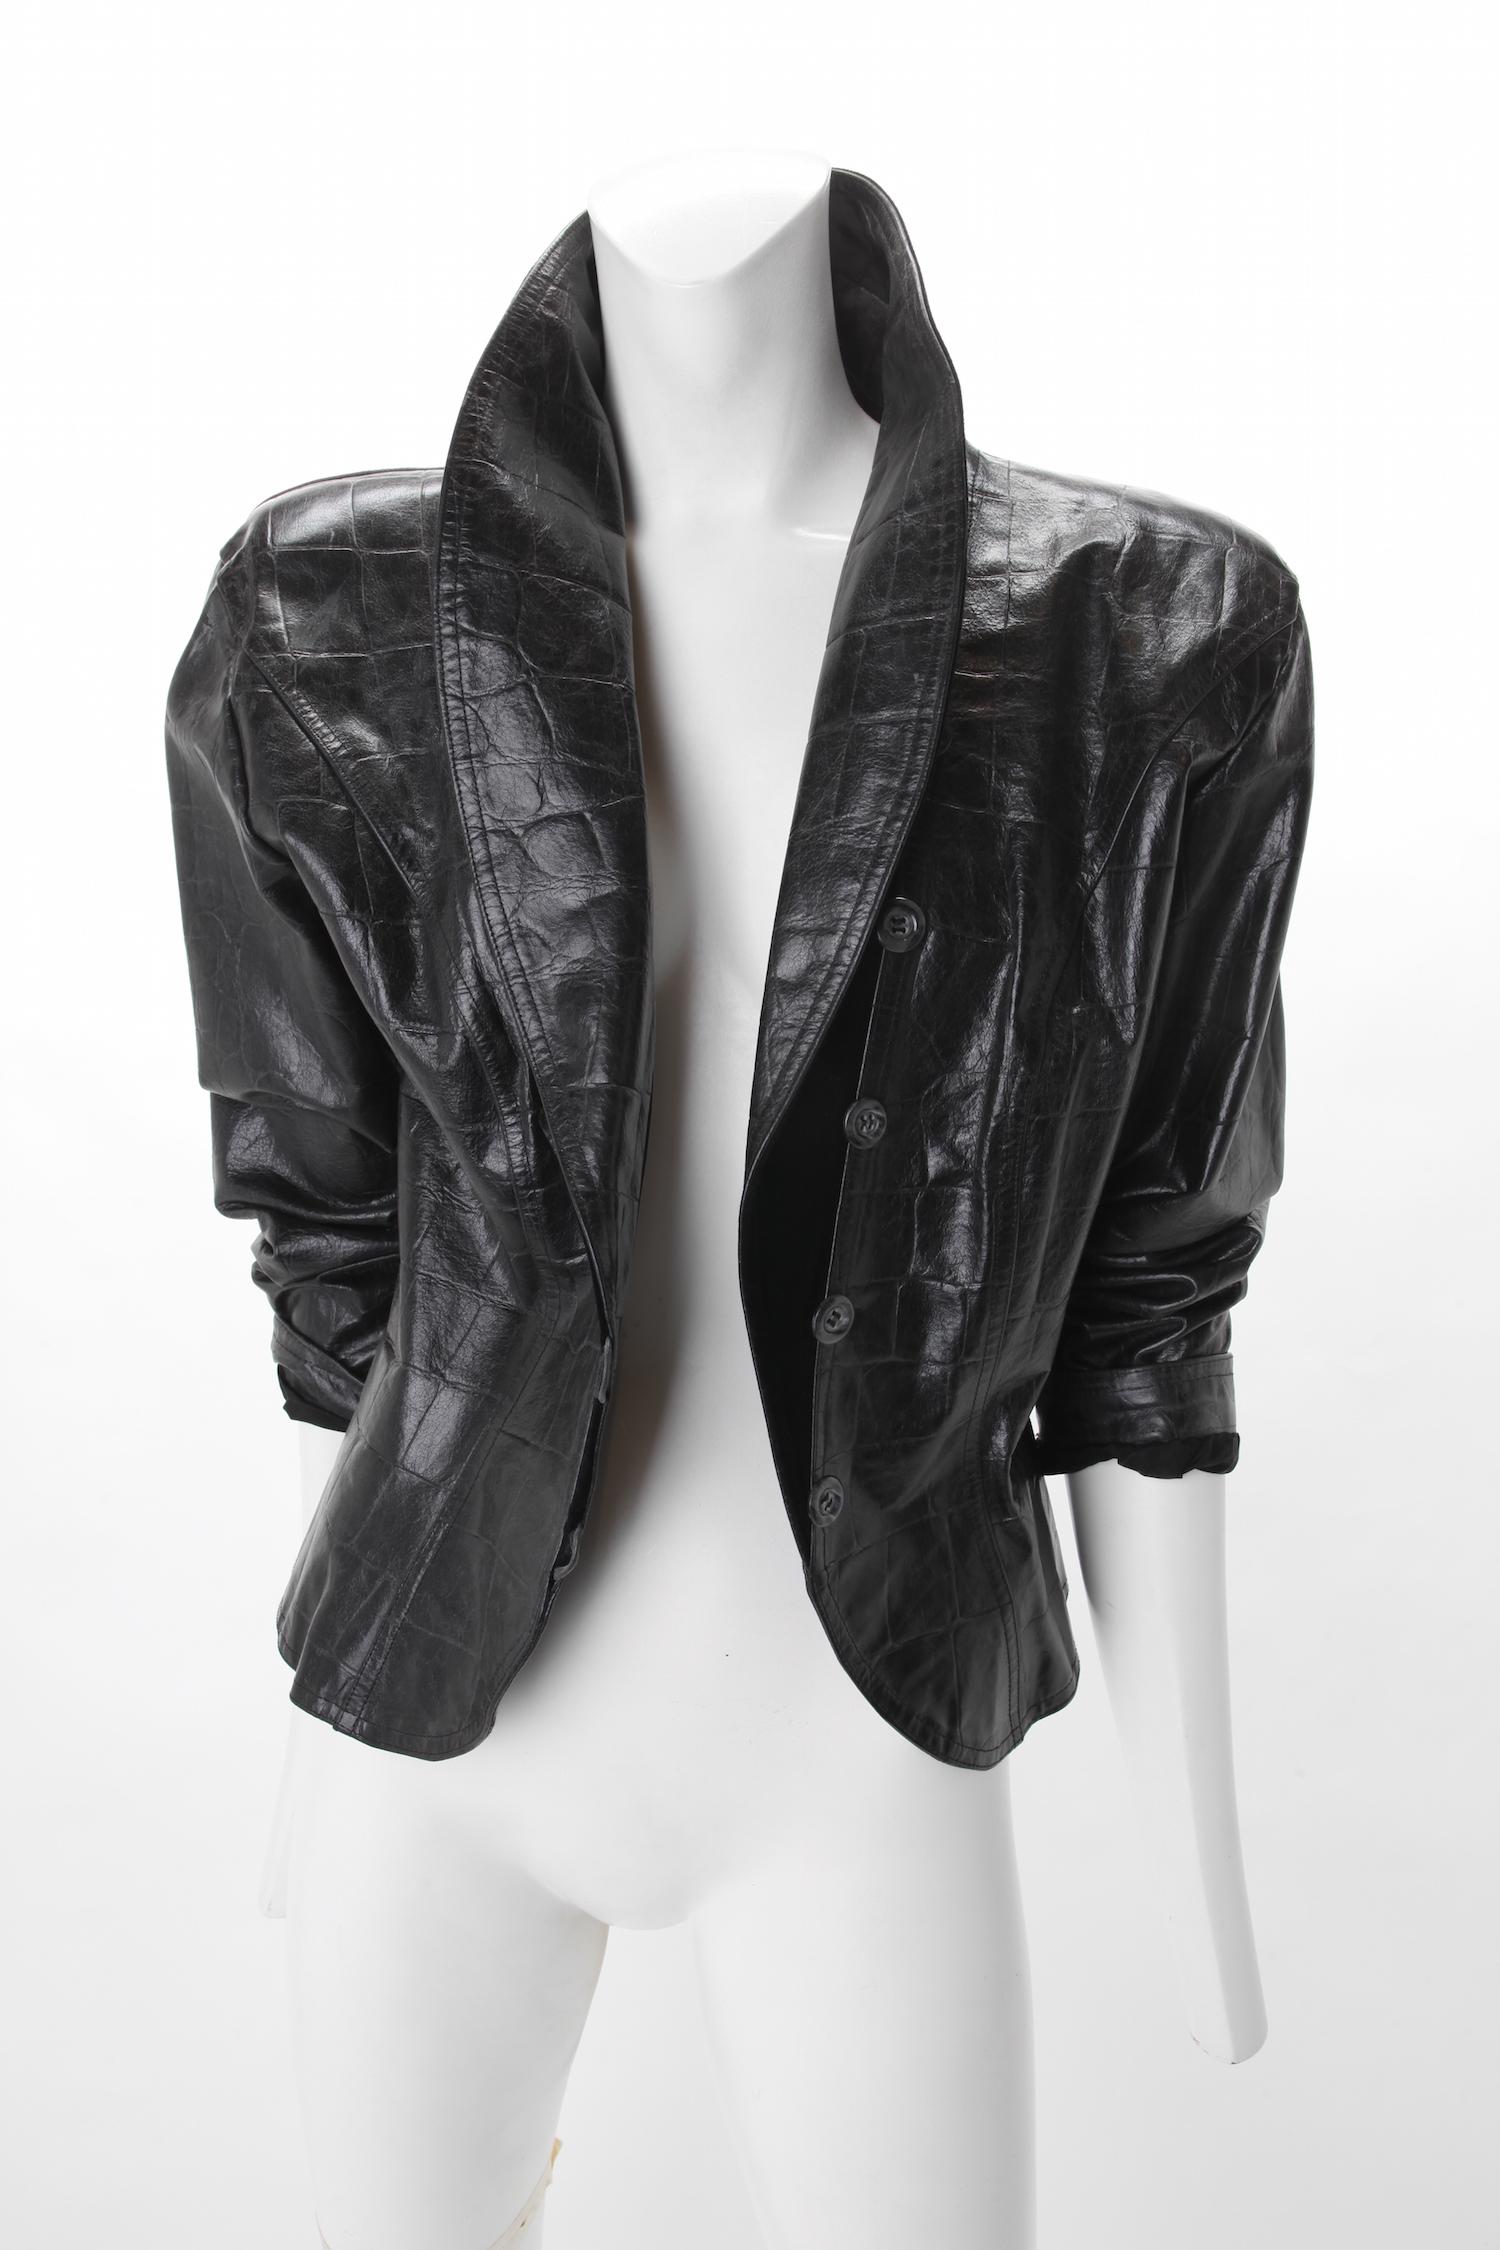 Emanuel Ungaro Parallele Paris Crocodile Embossed Leather Jacket, c. 1980s.
Emanuel Ungaro Parallele Paris Crocodile Embossed Leather Jacket with shoulder pads.
Jacket features velvet lined pointed collar designed to be worn either up or down.
Four